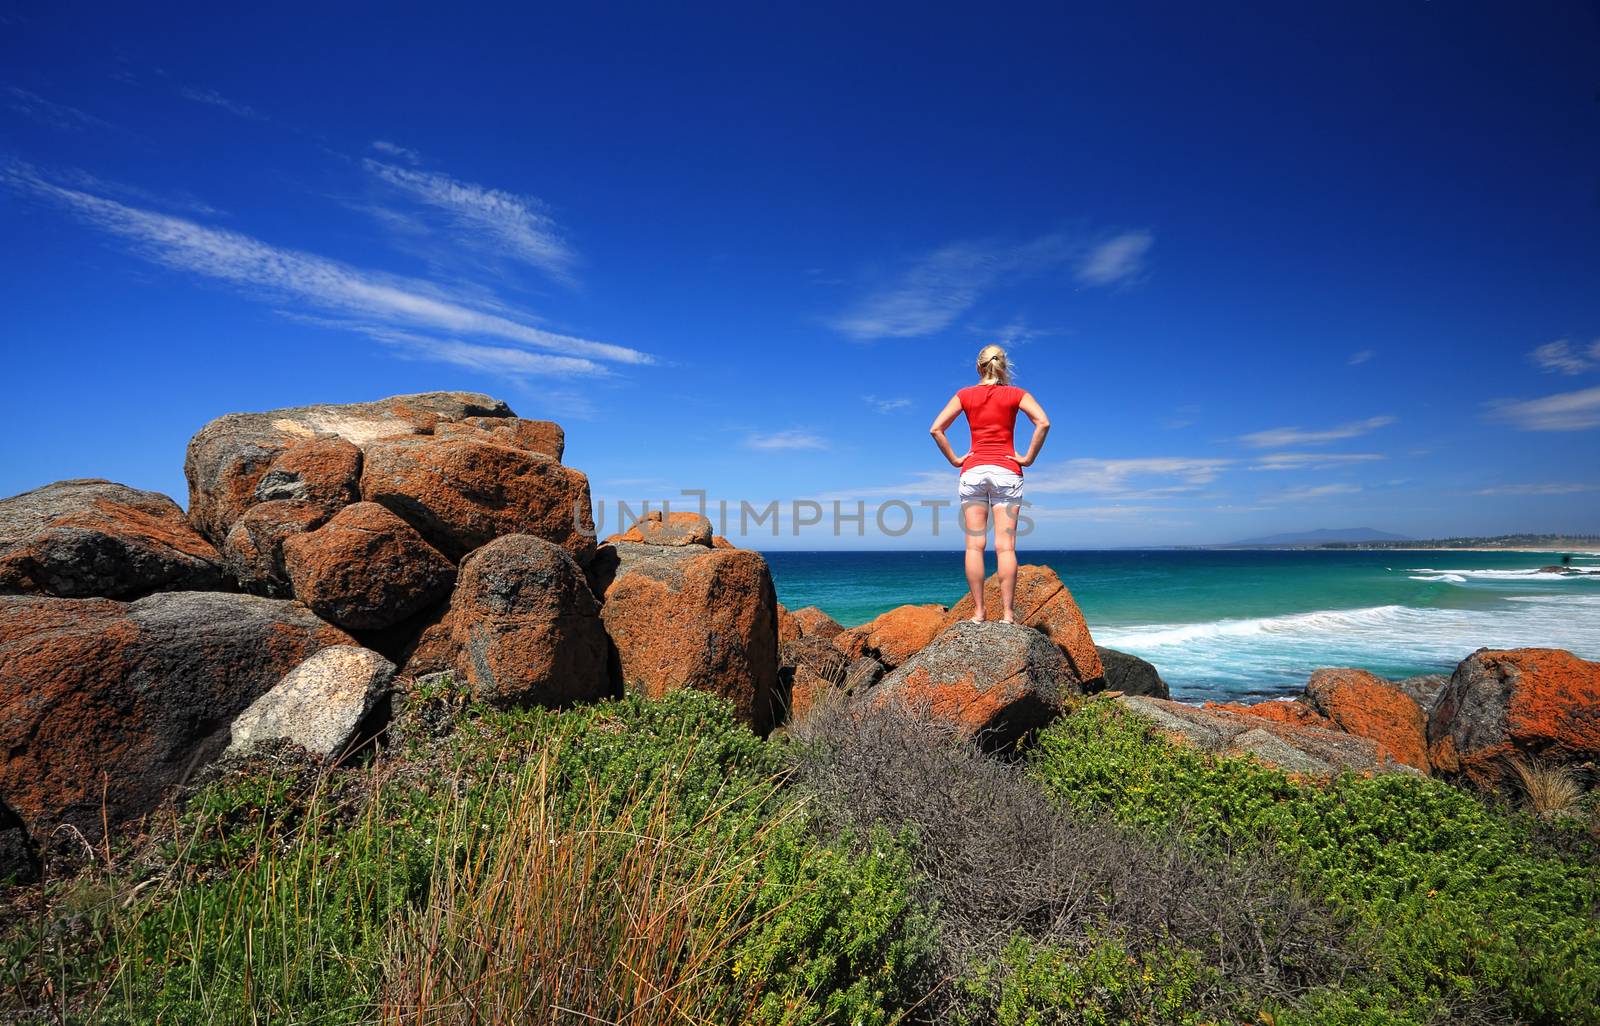 A female standing on the vibrant orange rocks and looking out to sea.  Bingie Point, Eurobodalla National Park on the Sapphire Coast of NSW, Australia.  Mount Gulaga in the far distance